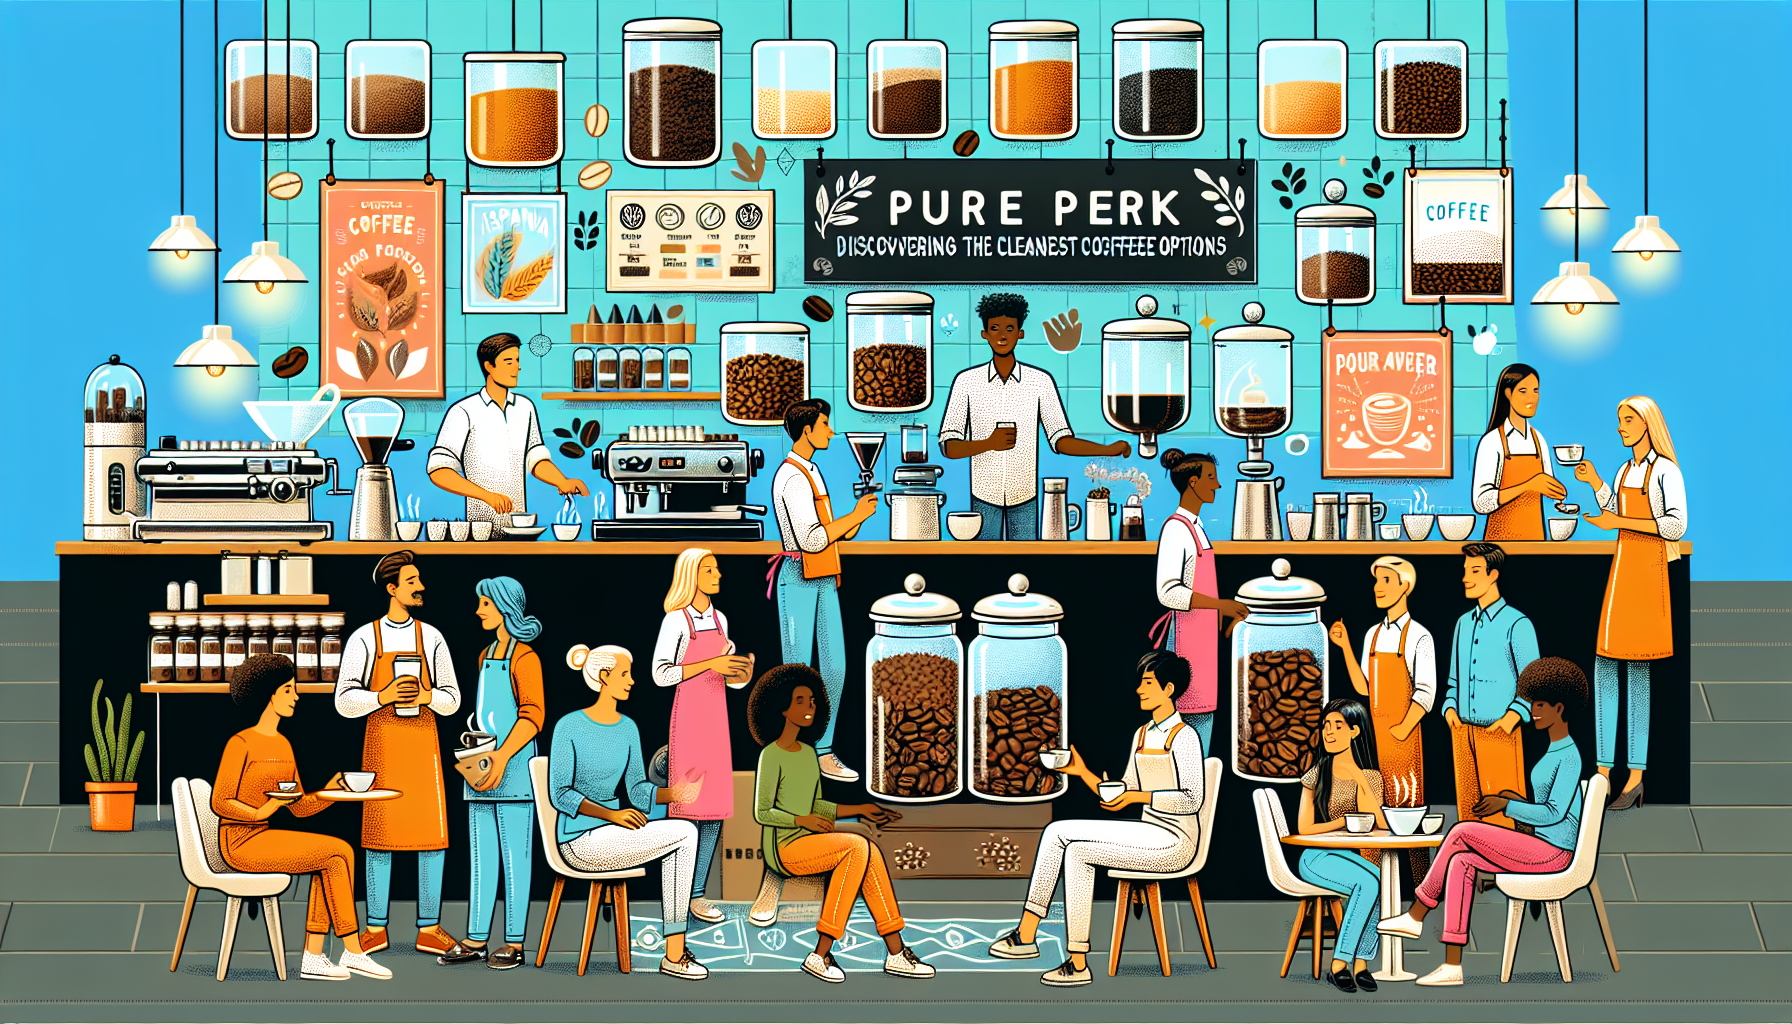 Illustration of a bright and lively coffee house filled with patrons from different descents such as Caucasian, Hispanic, Black, Middle-Eastern, and South Asian, both male and female. There are differ